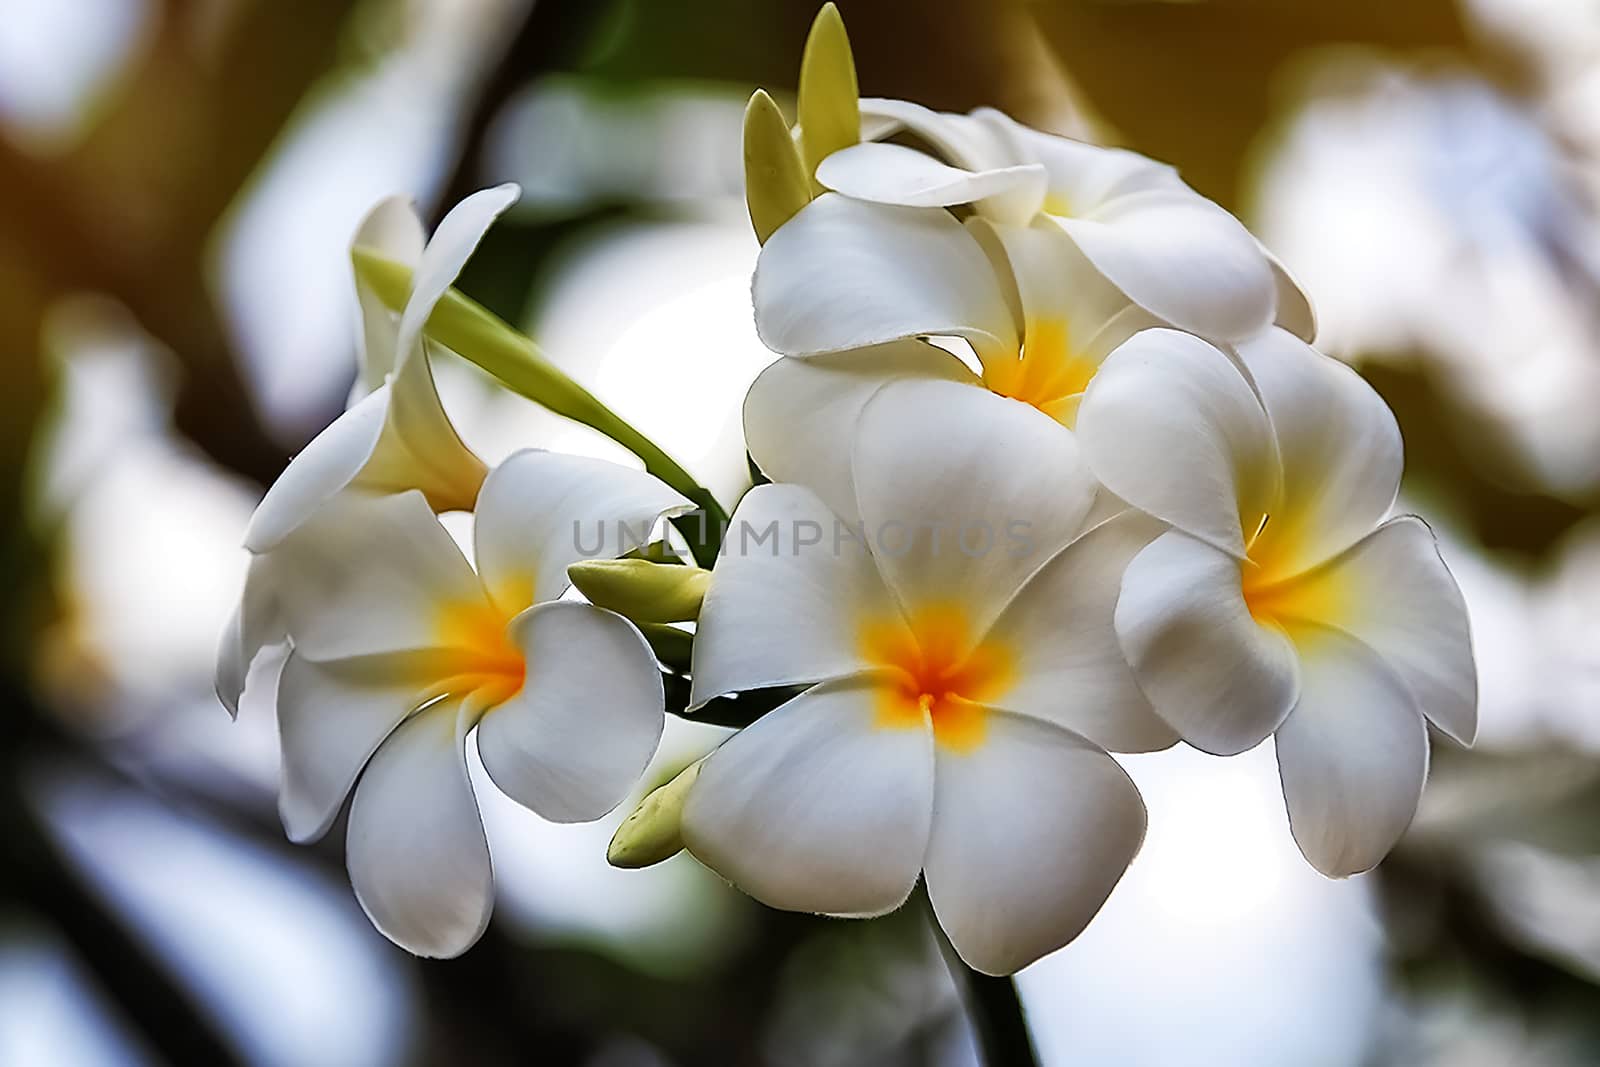 White and yellow frangipani flowers at sunset. by numberone9018